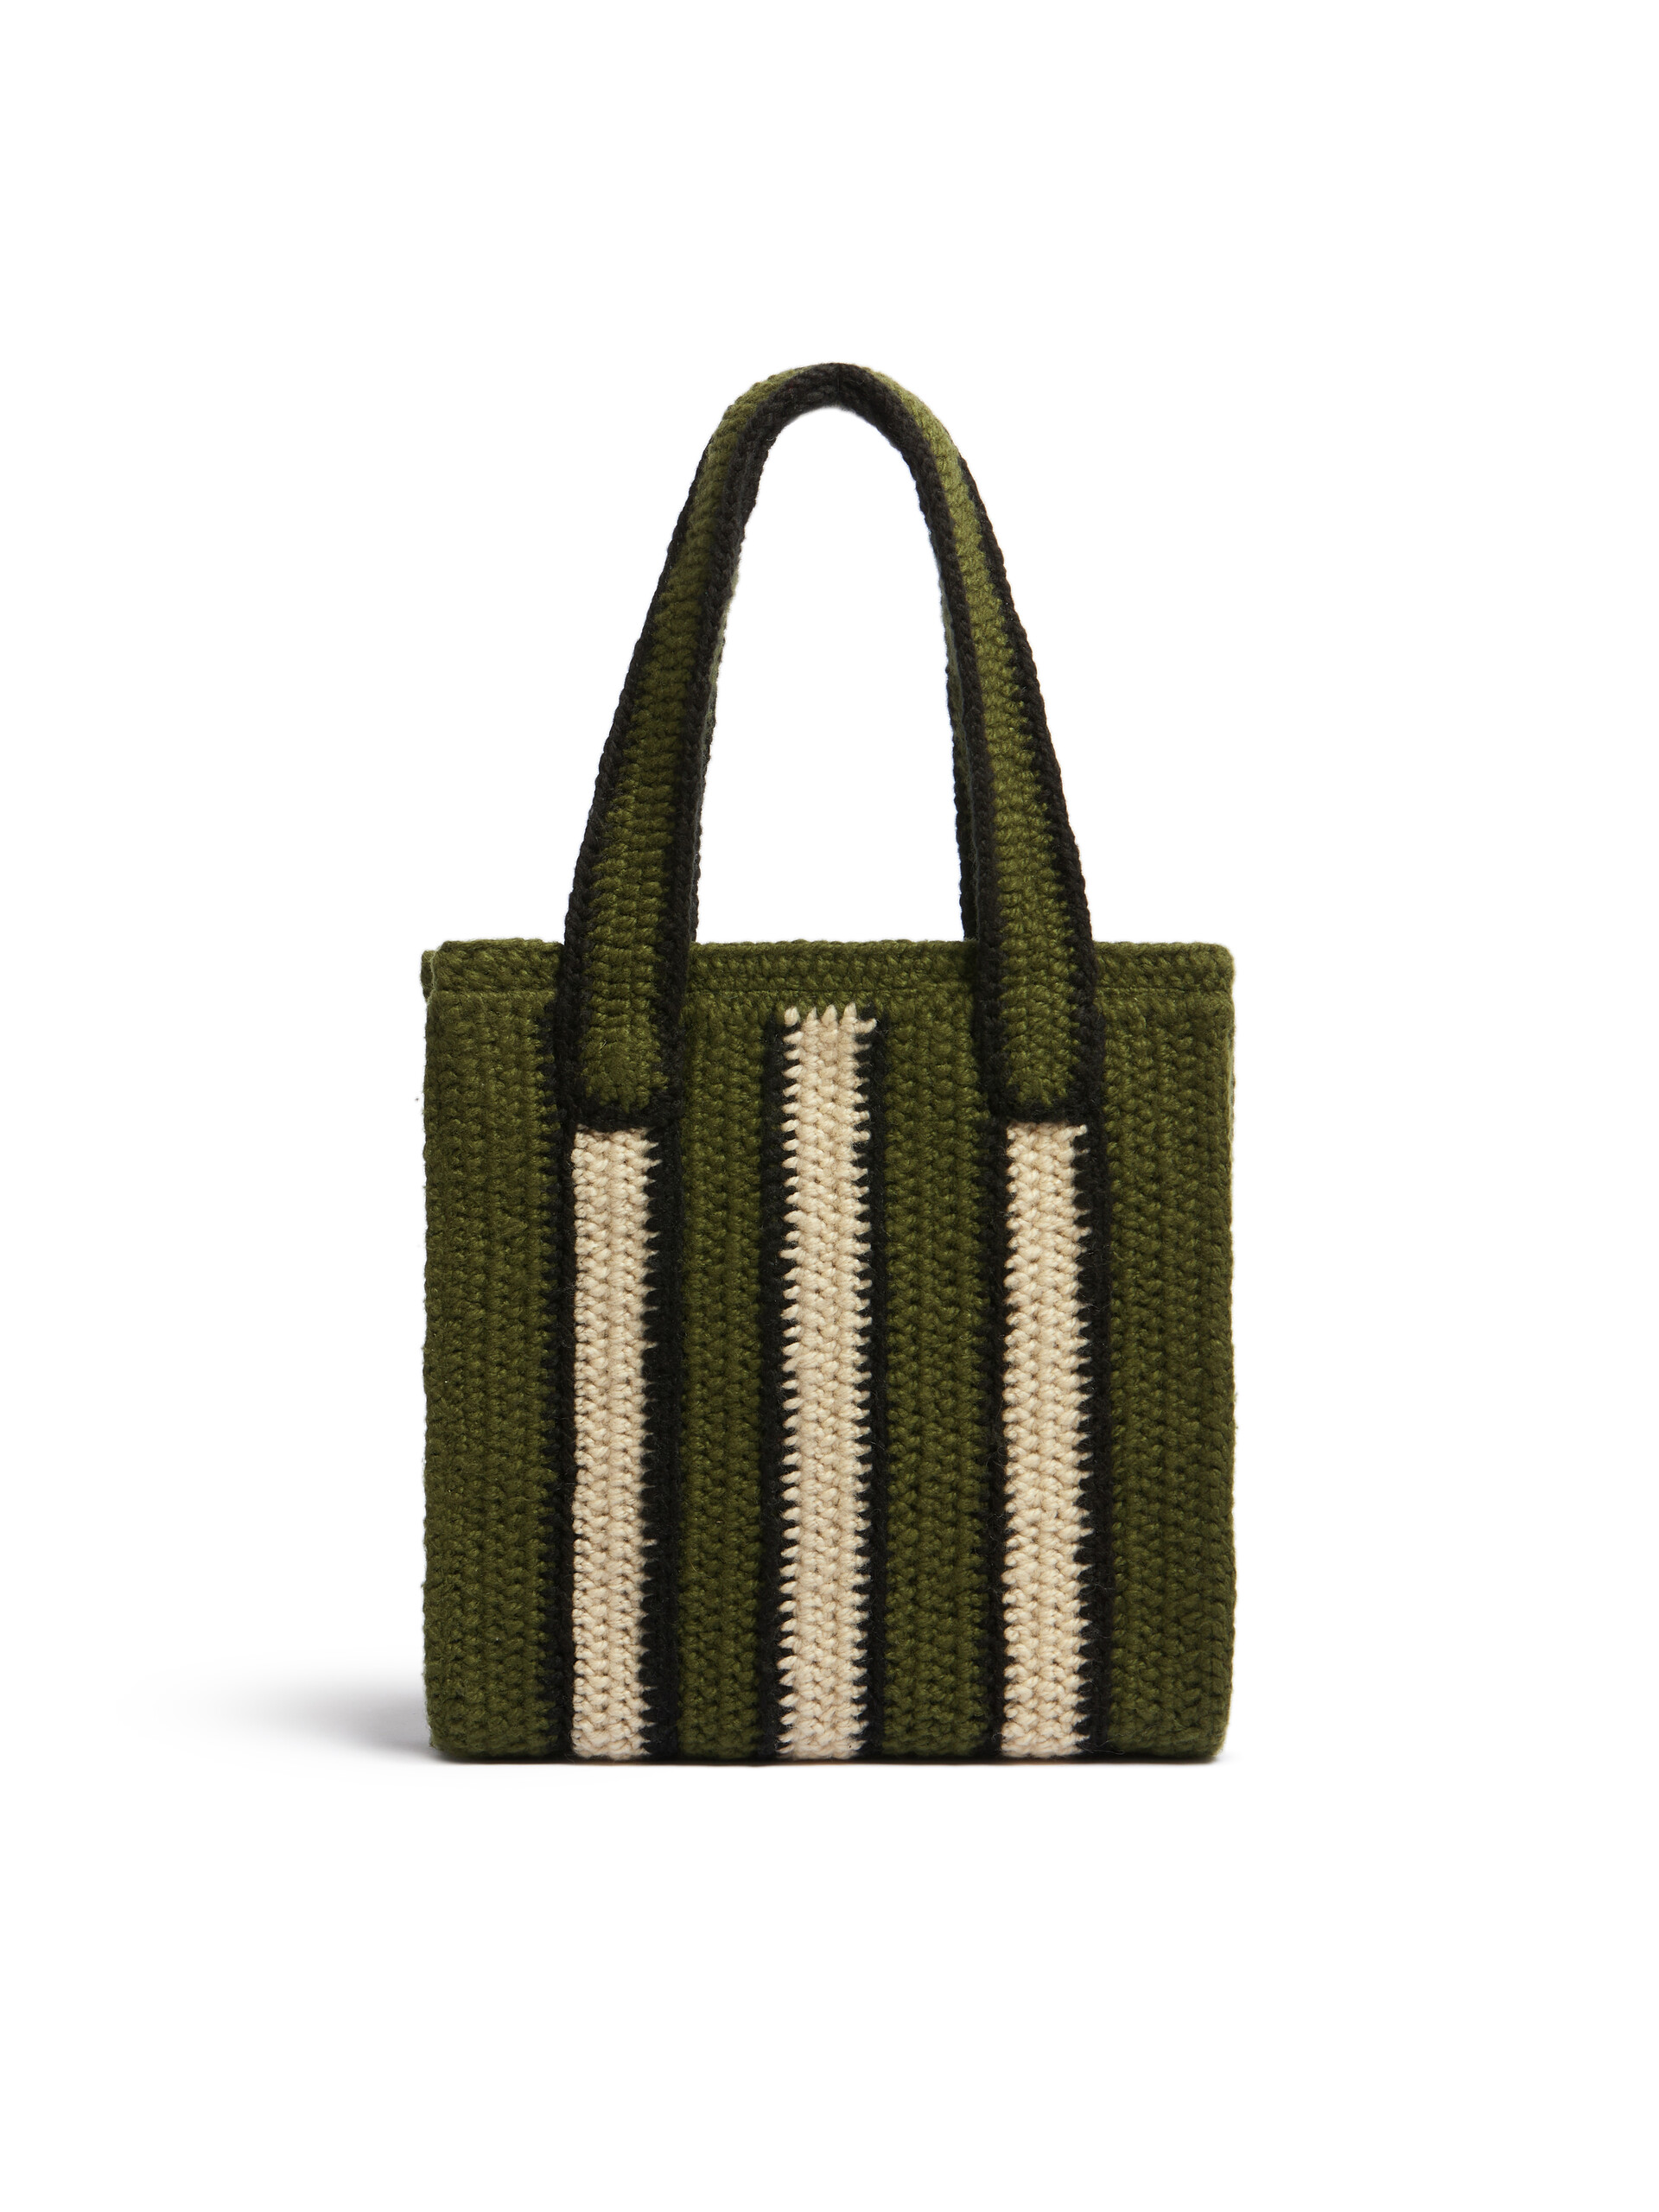 MARNI MARKET shopping bag in striped blue and red crochet - Shopping Bags - Image 3